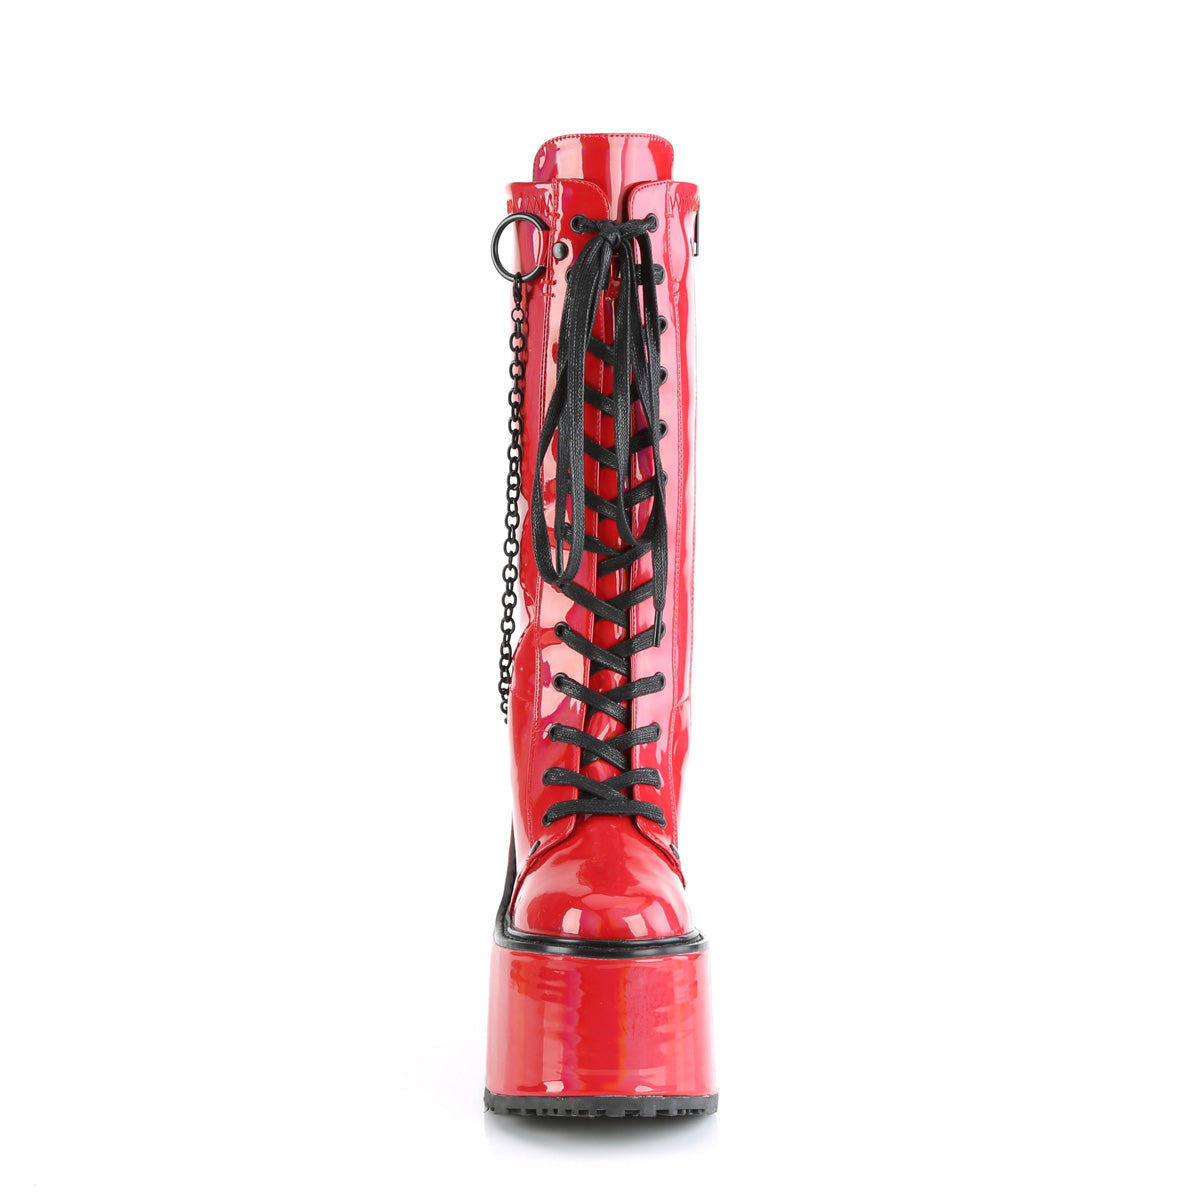 SWING-150 Red Holographic Stretch Patent Knee Boot Demonia